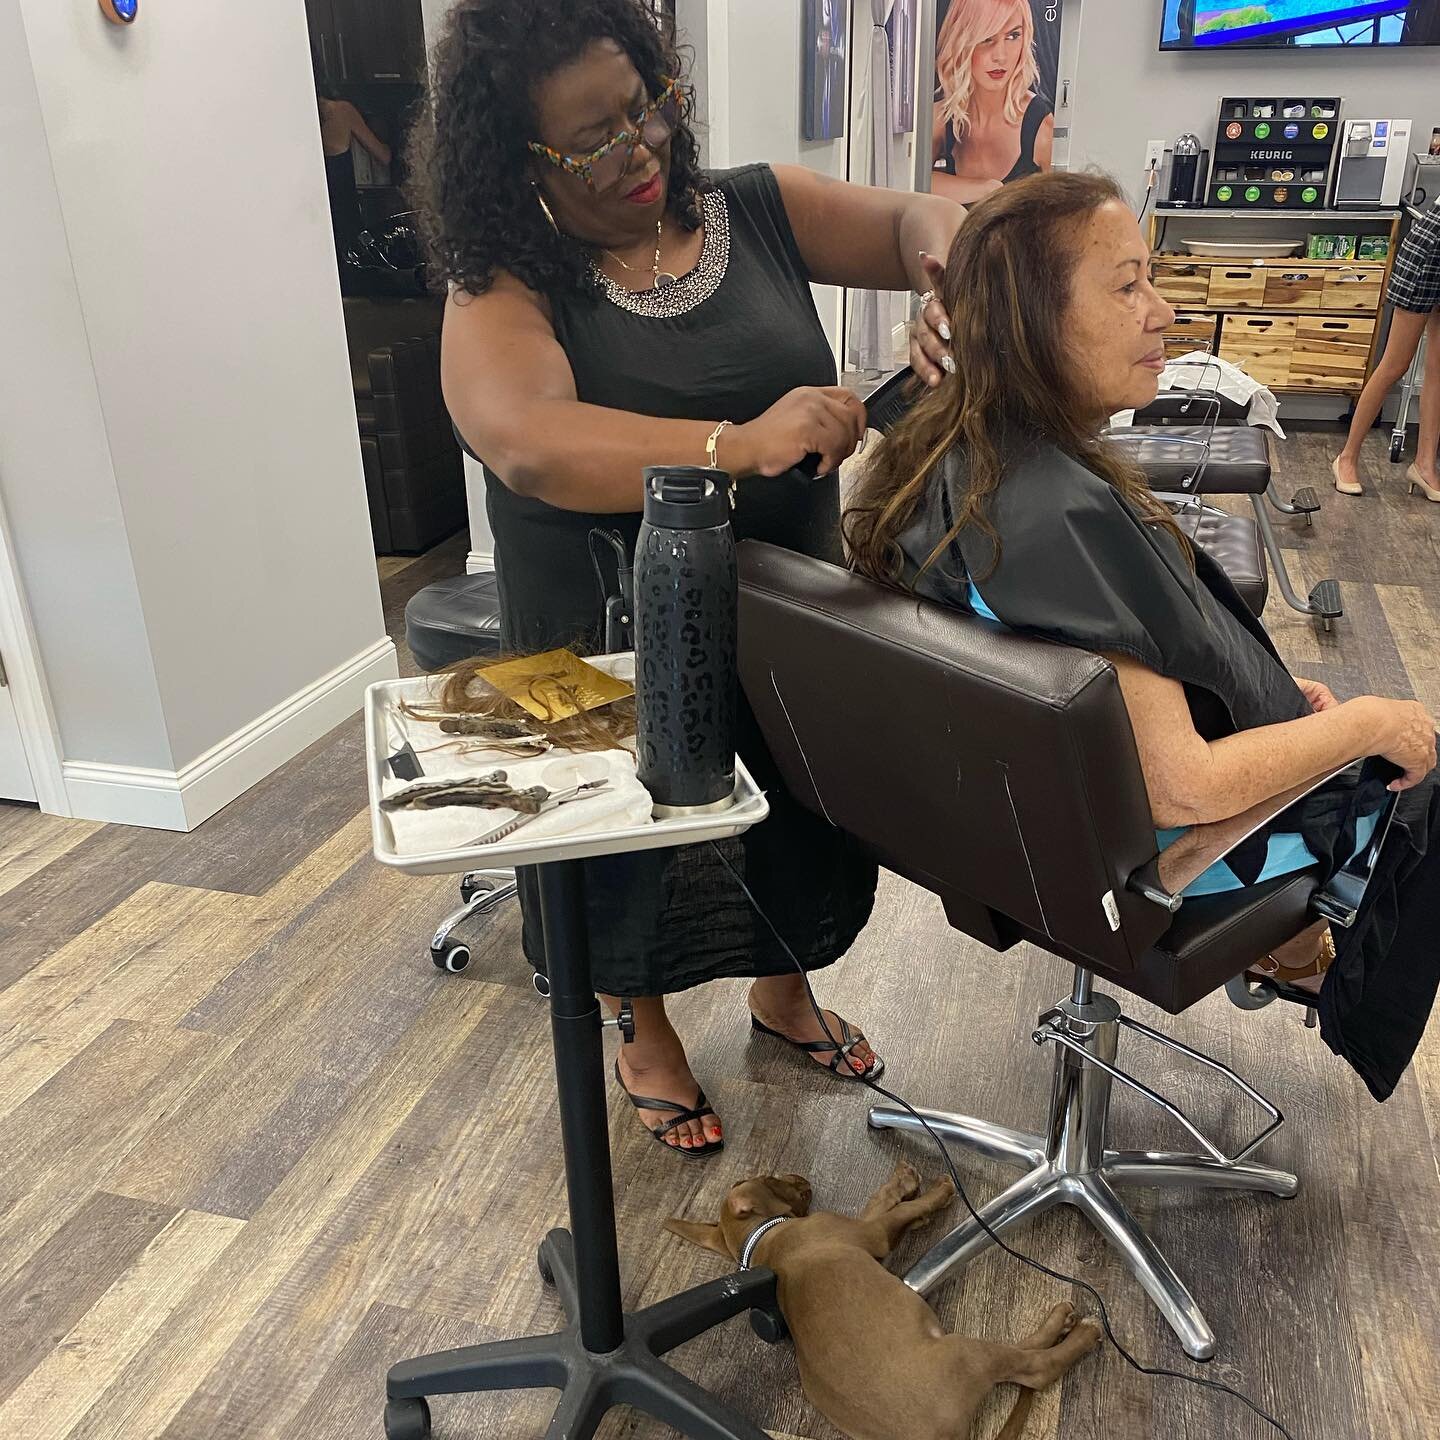 A good leader steps in and works with the crew. A good doggy sits by her feet 🐾👠🪜
-
-
-
#kjs444 #katherinejonsalon #top200salon #euforasalon #euforaeducator #femalebusinessowner #leader #katrocksmyworld